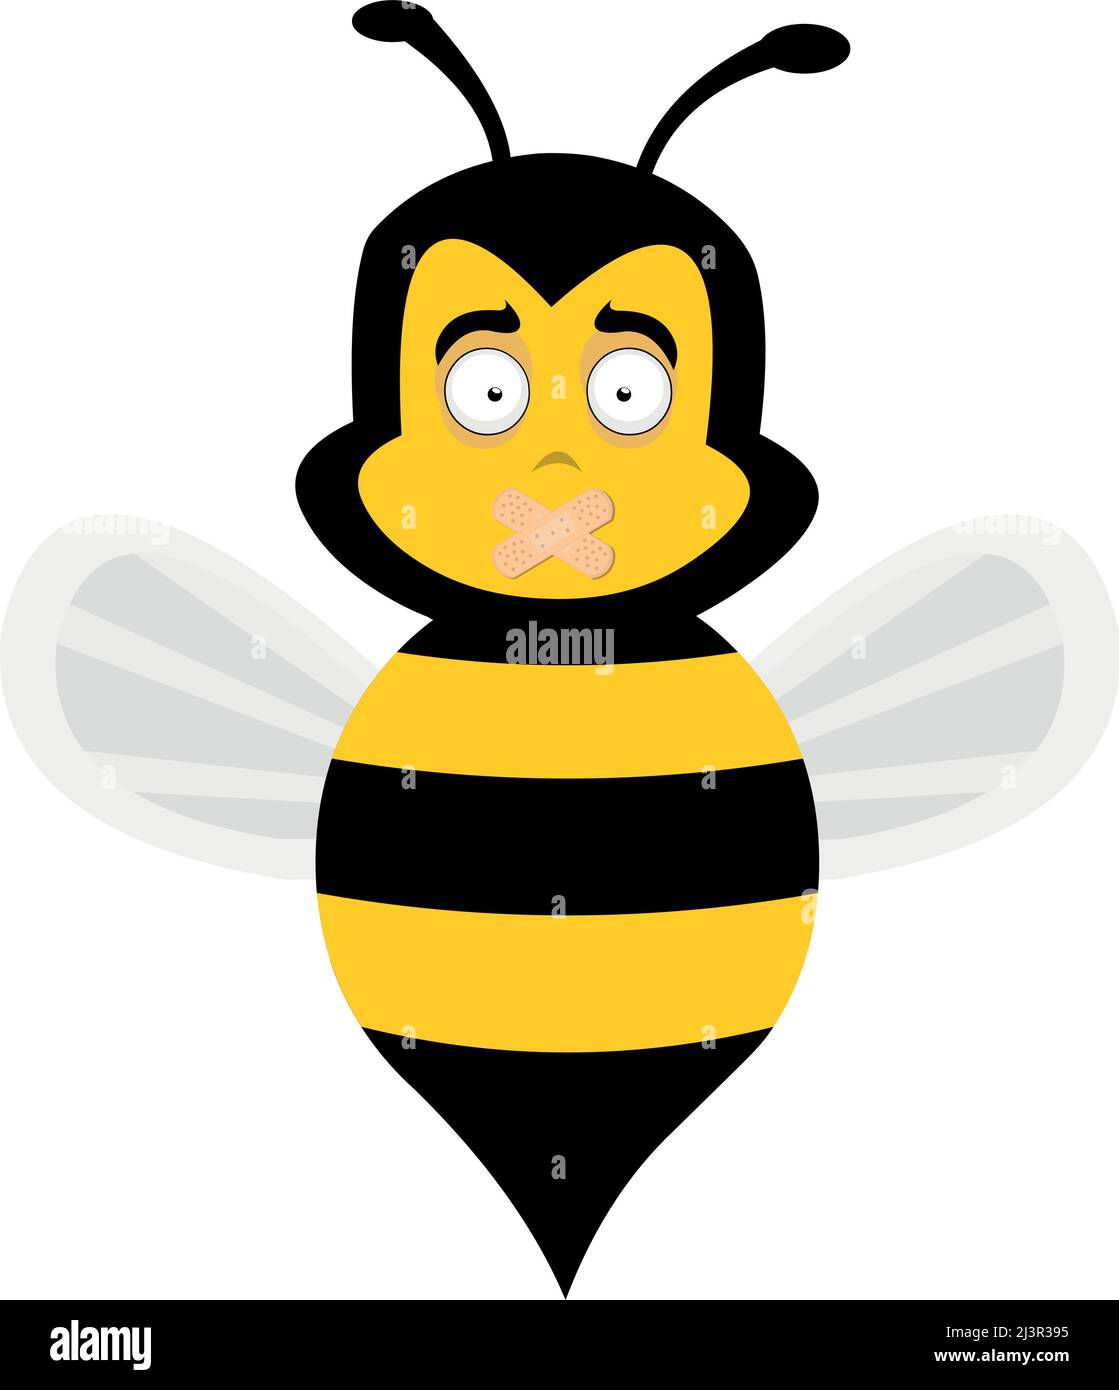 Vector character illustration of a cartoon bee with adhesive bands on its mouth Stock Vector